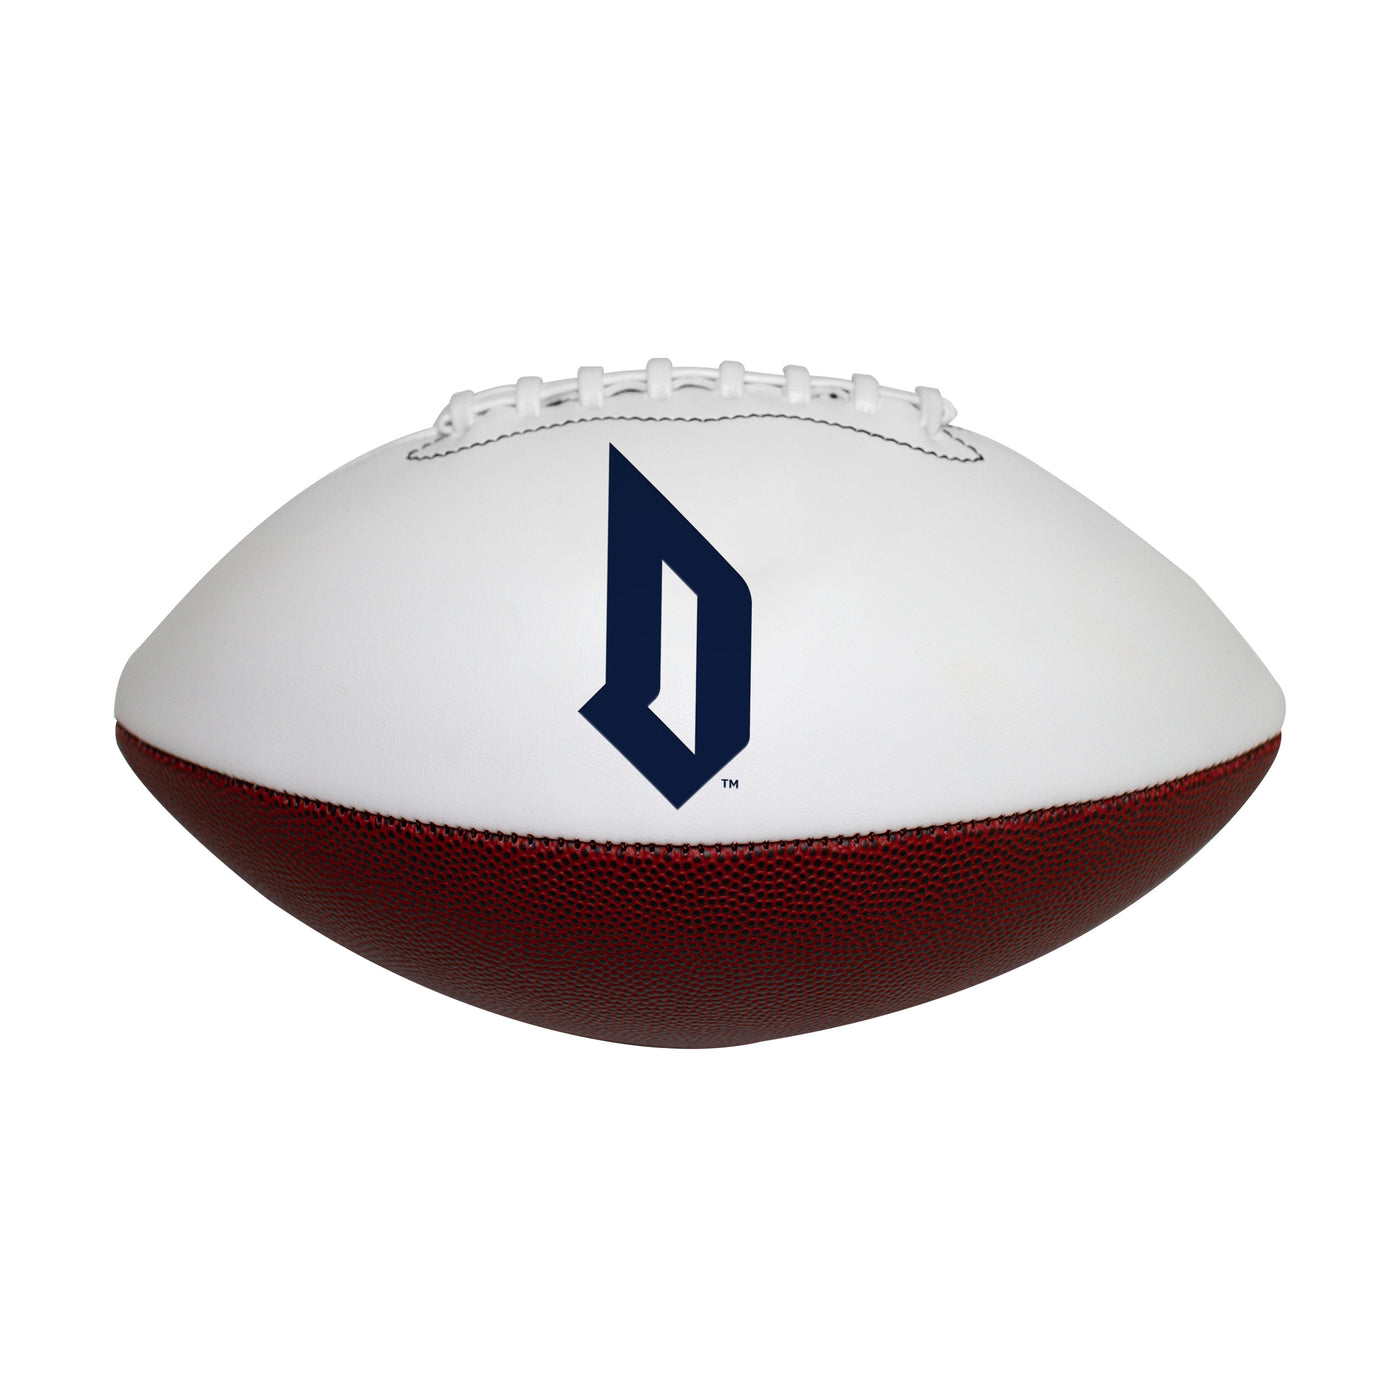 Duquesne Full Size Autograph Football